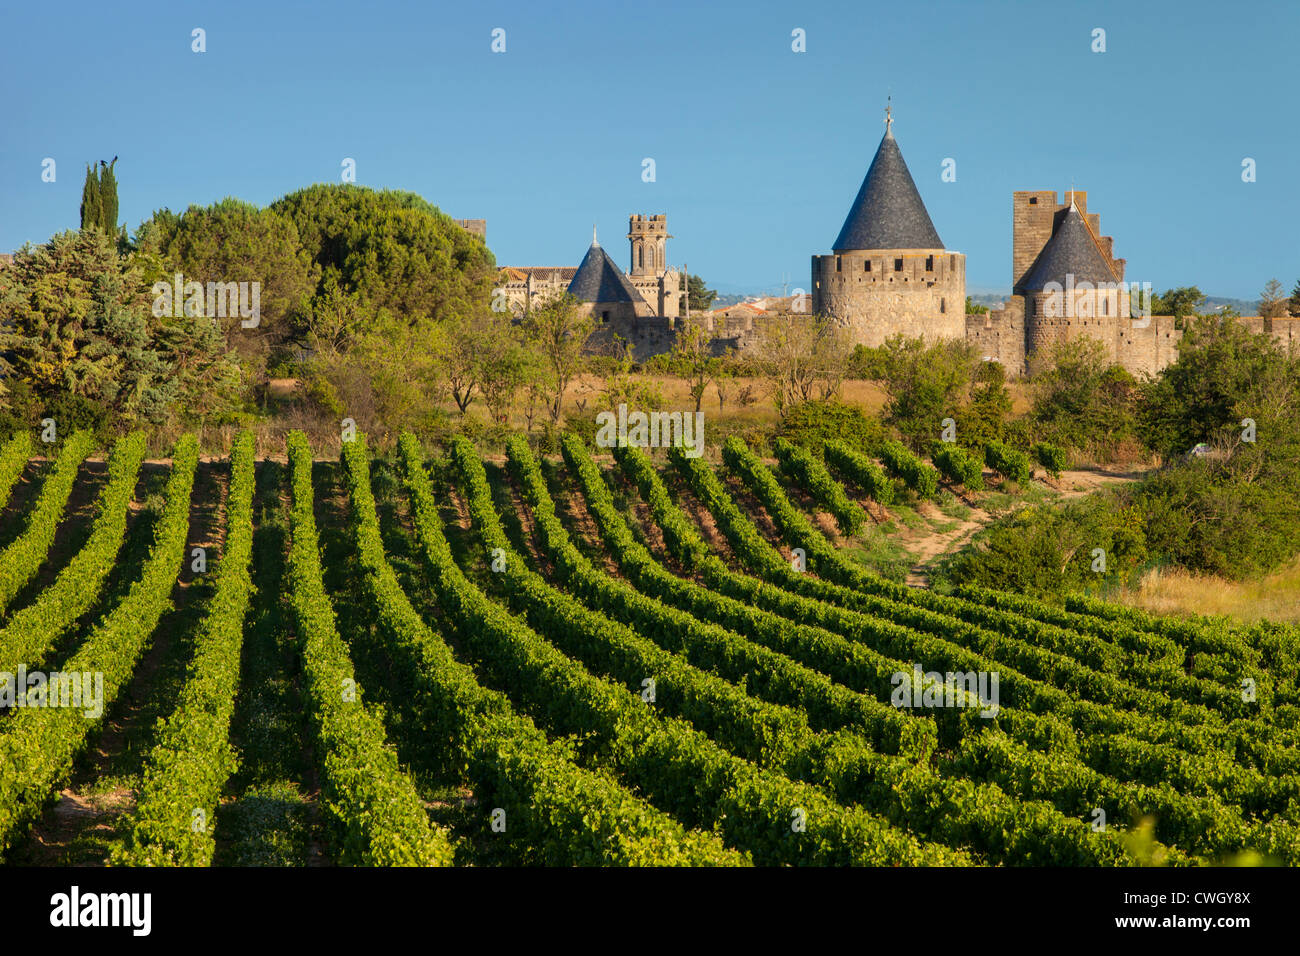 Dawn in a vineyard overlooking la Cite Carcassonne, Languedoc-Roussillon, France Stock Photo